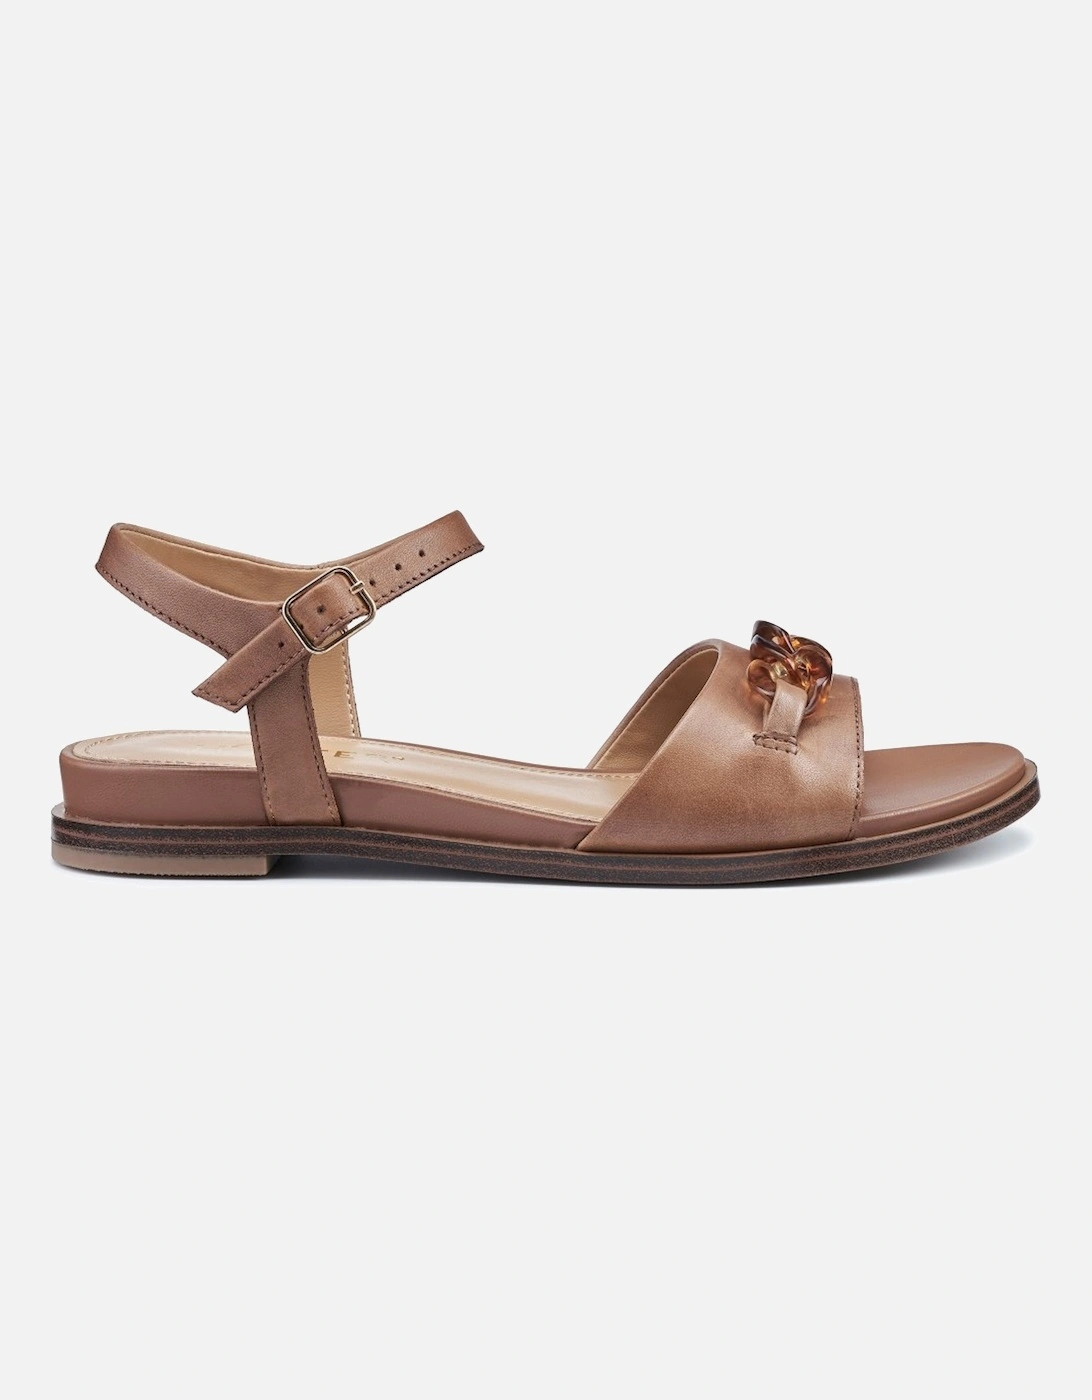 Modena Womens Wide Fit Sandals